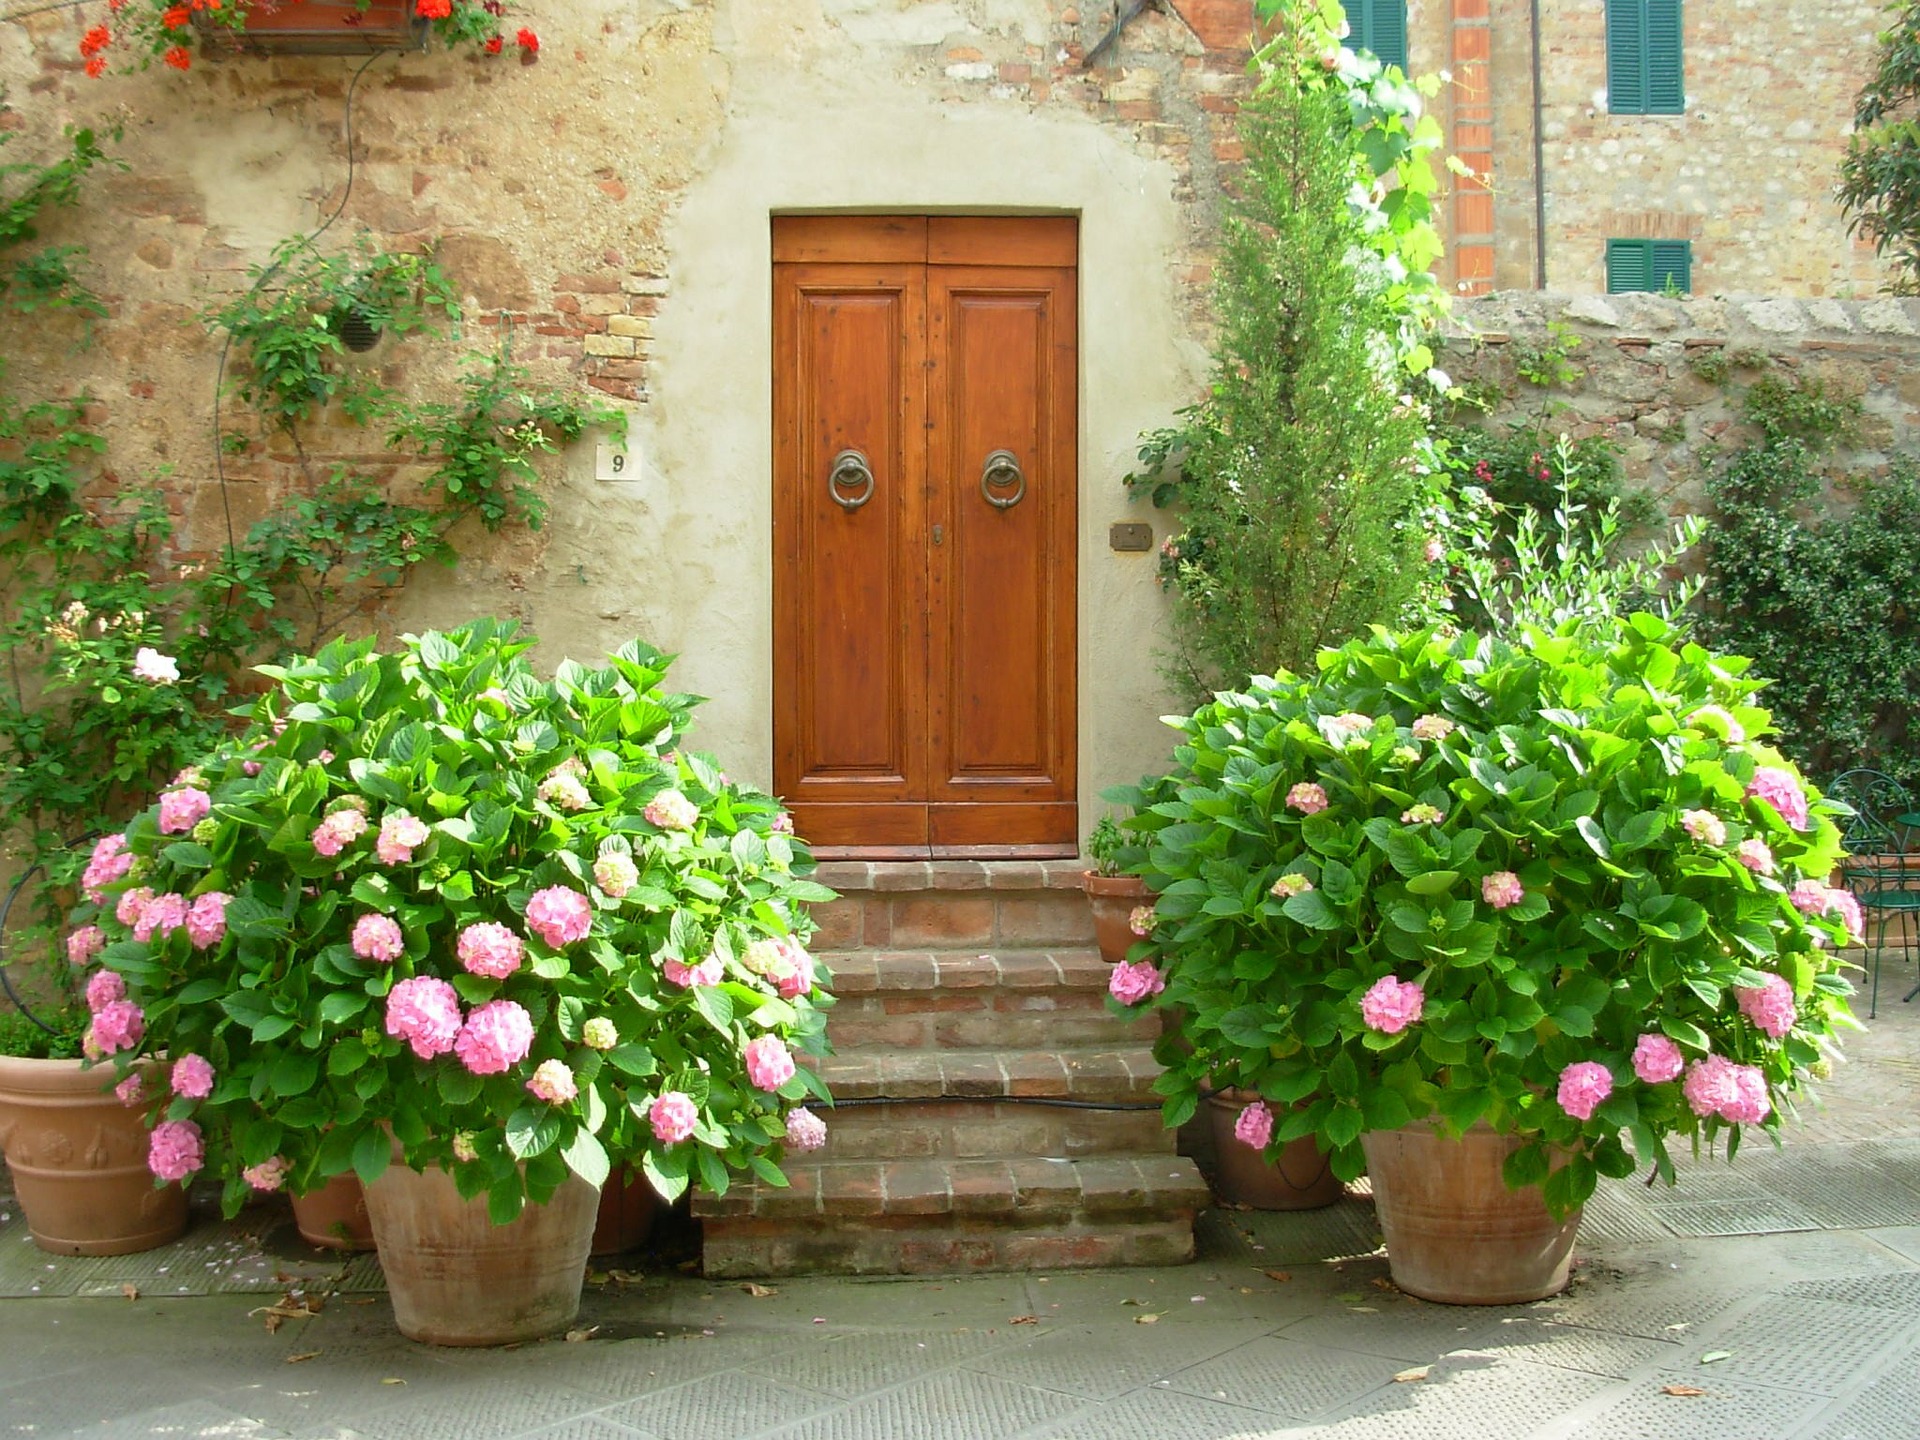 Welcoming entryway with beautiful plants